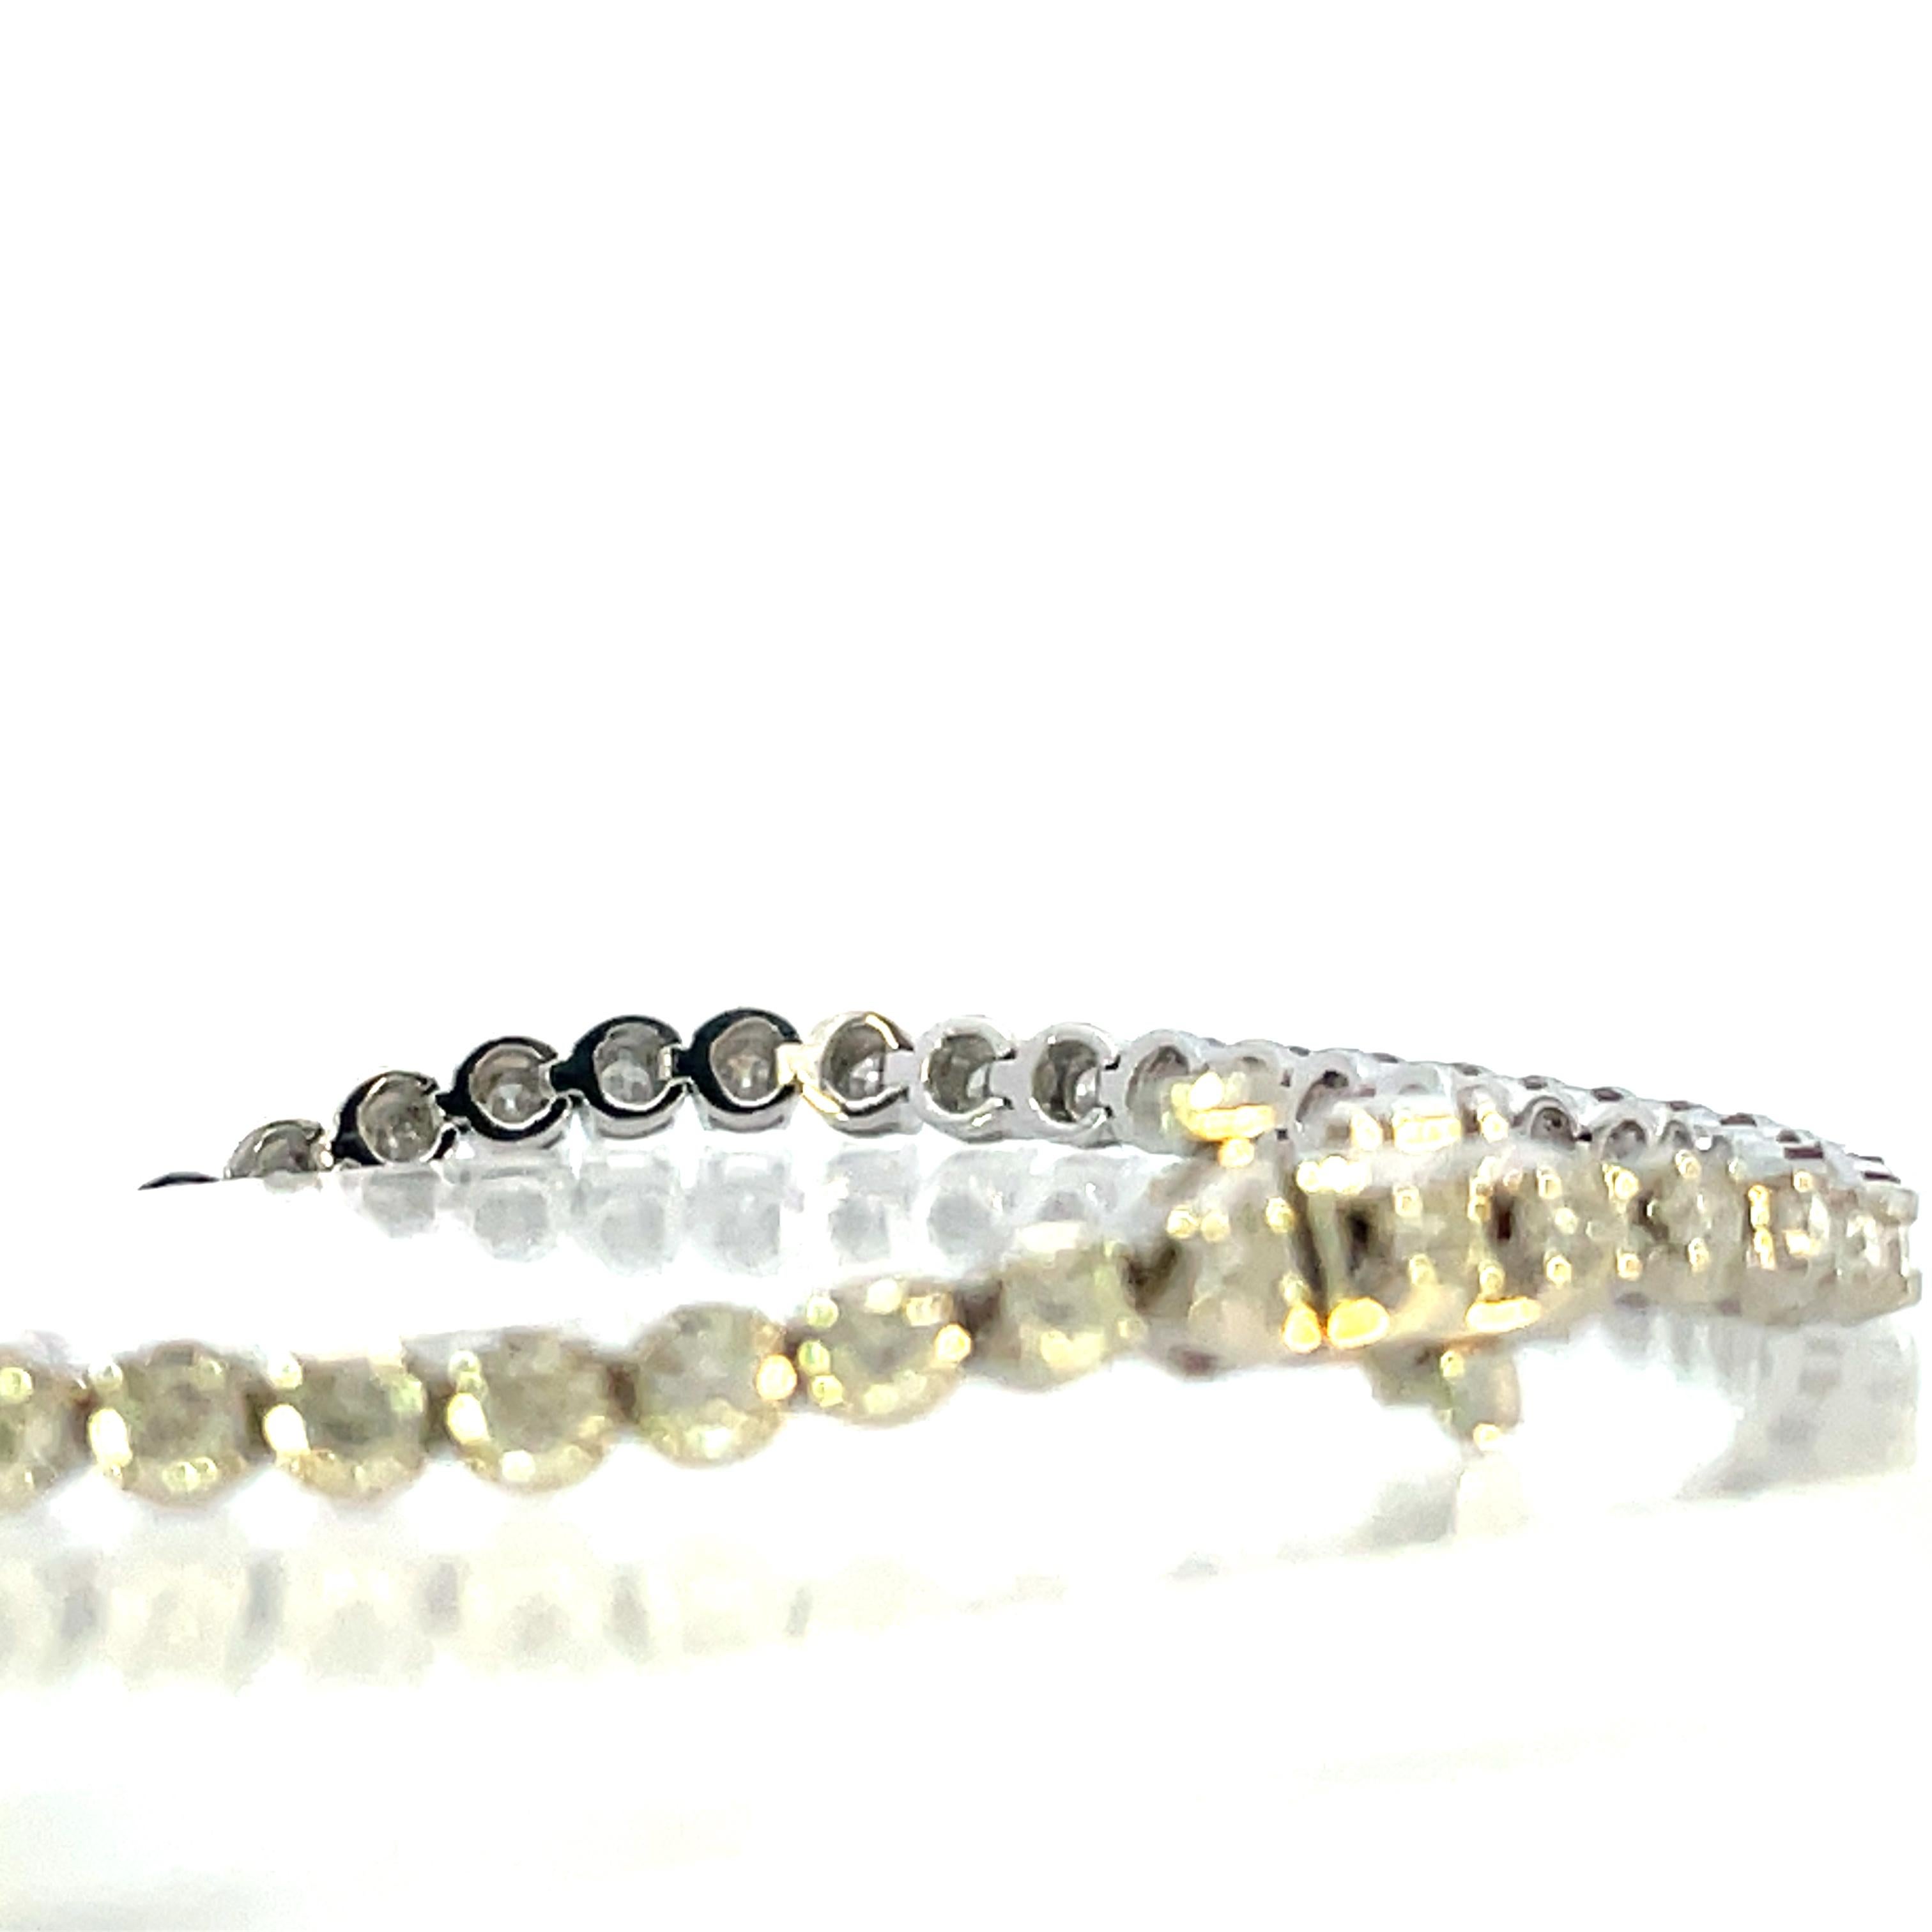 This is an incredibly beautiful 14k white gold 7” tennis diamond bracelet. The straight line design ensures the bracelet will not spin or rotate on the wrist and the diamonds are always facing up and shining brightly. This, combined with the